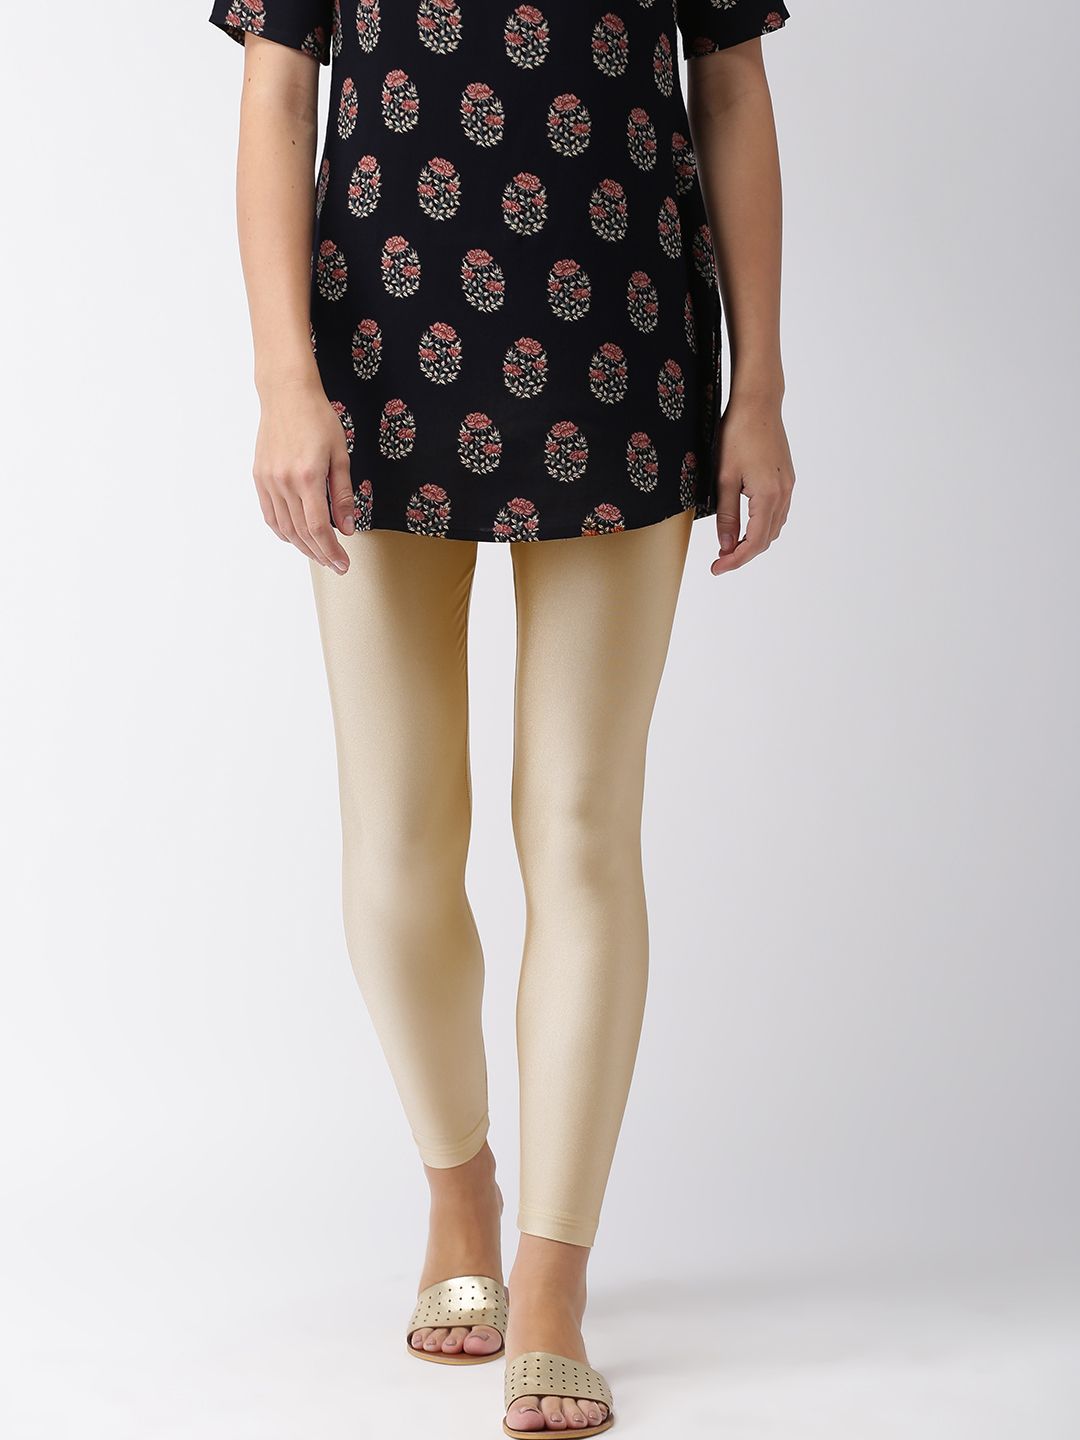 Go Colors Women Gold-Toned Solid Ankle-Length Leggings Price in India